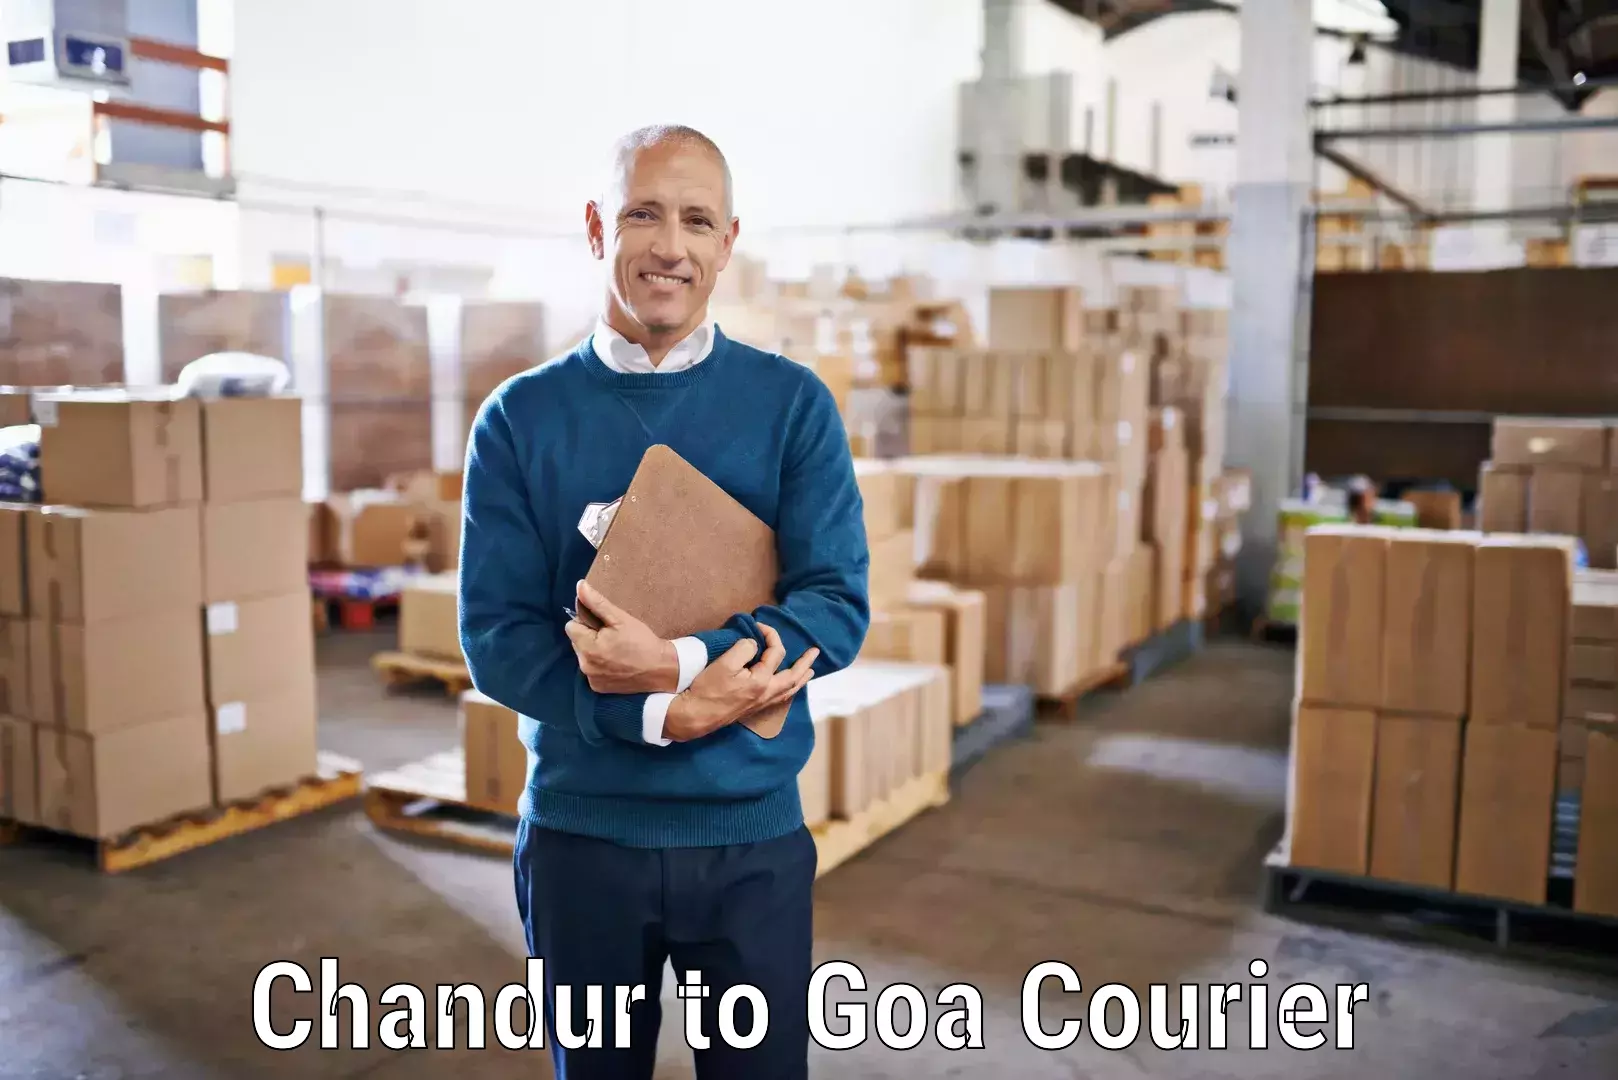 User-friendly delivery service Chandur to Goa